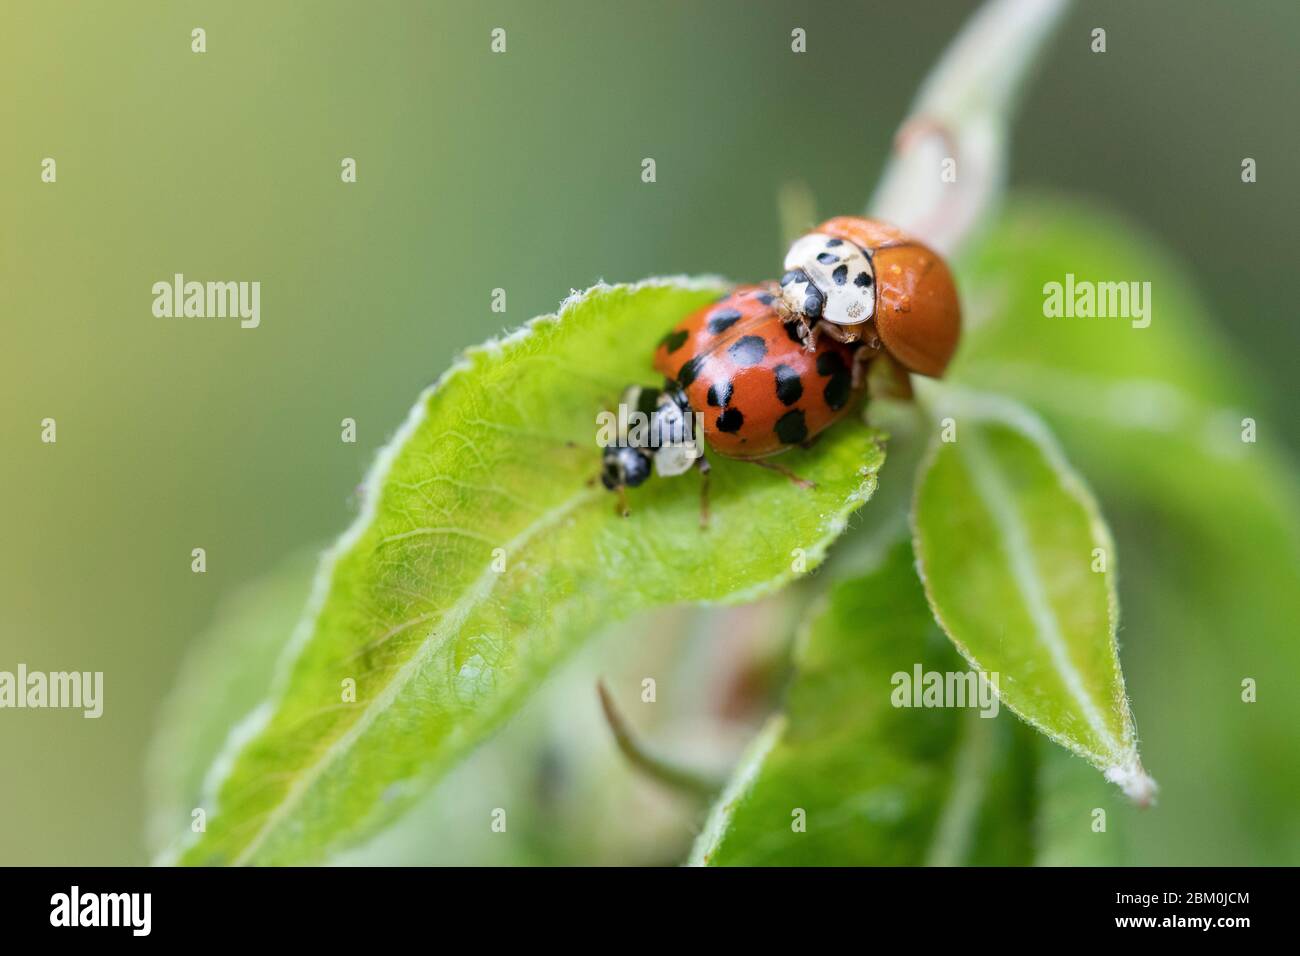 A closeup of a two red ladybug on a green leaf with a blurry background Stock Photo